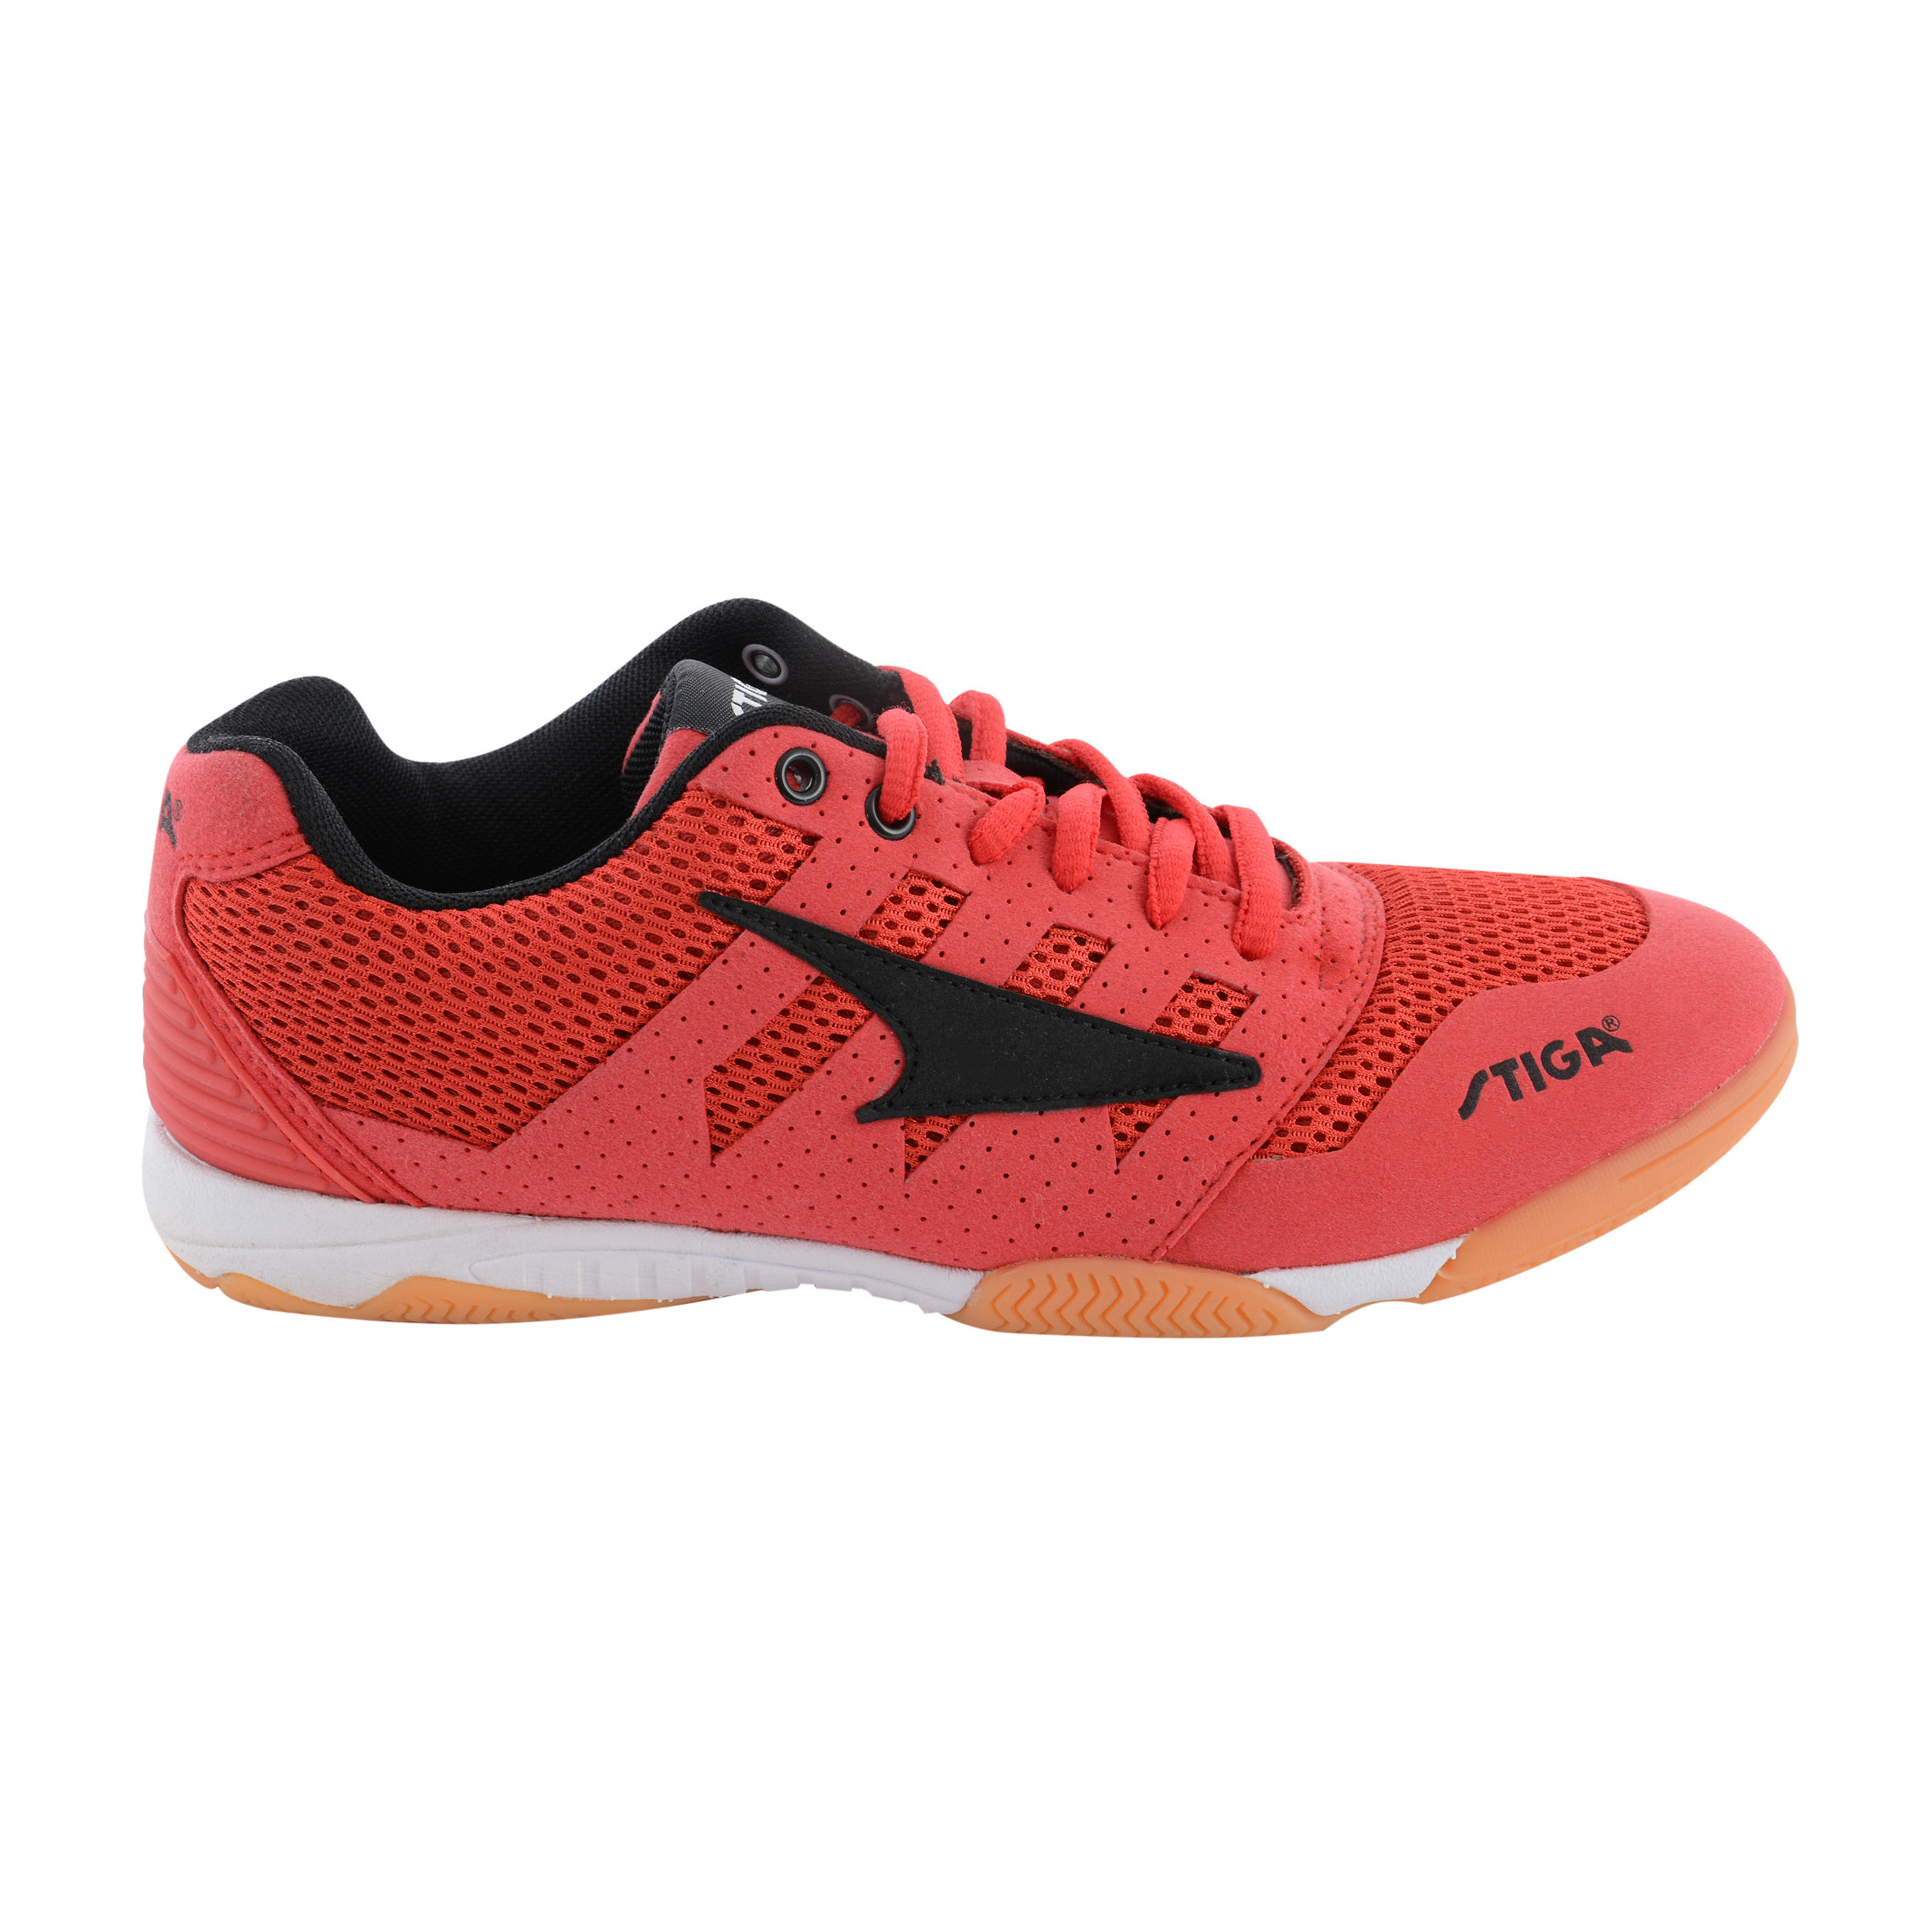 STIGA Perform Table Tennis Shoes - Red